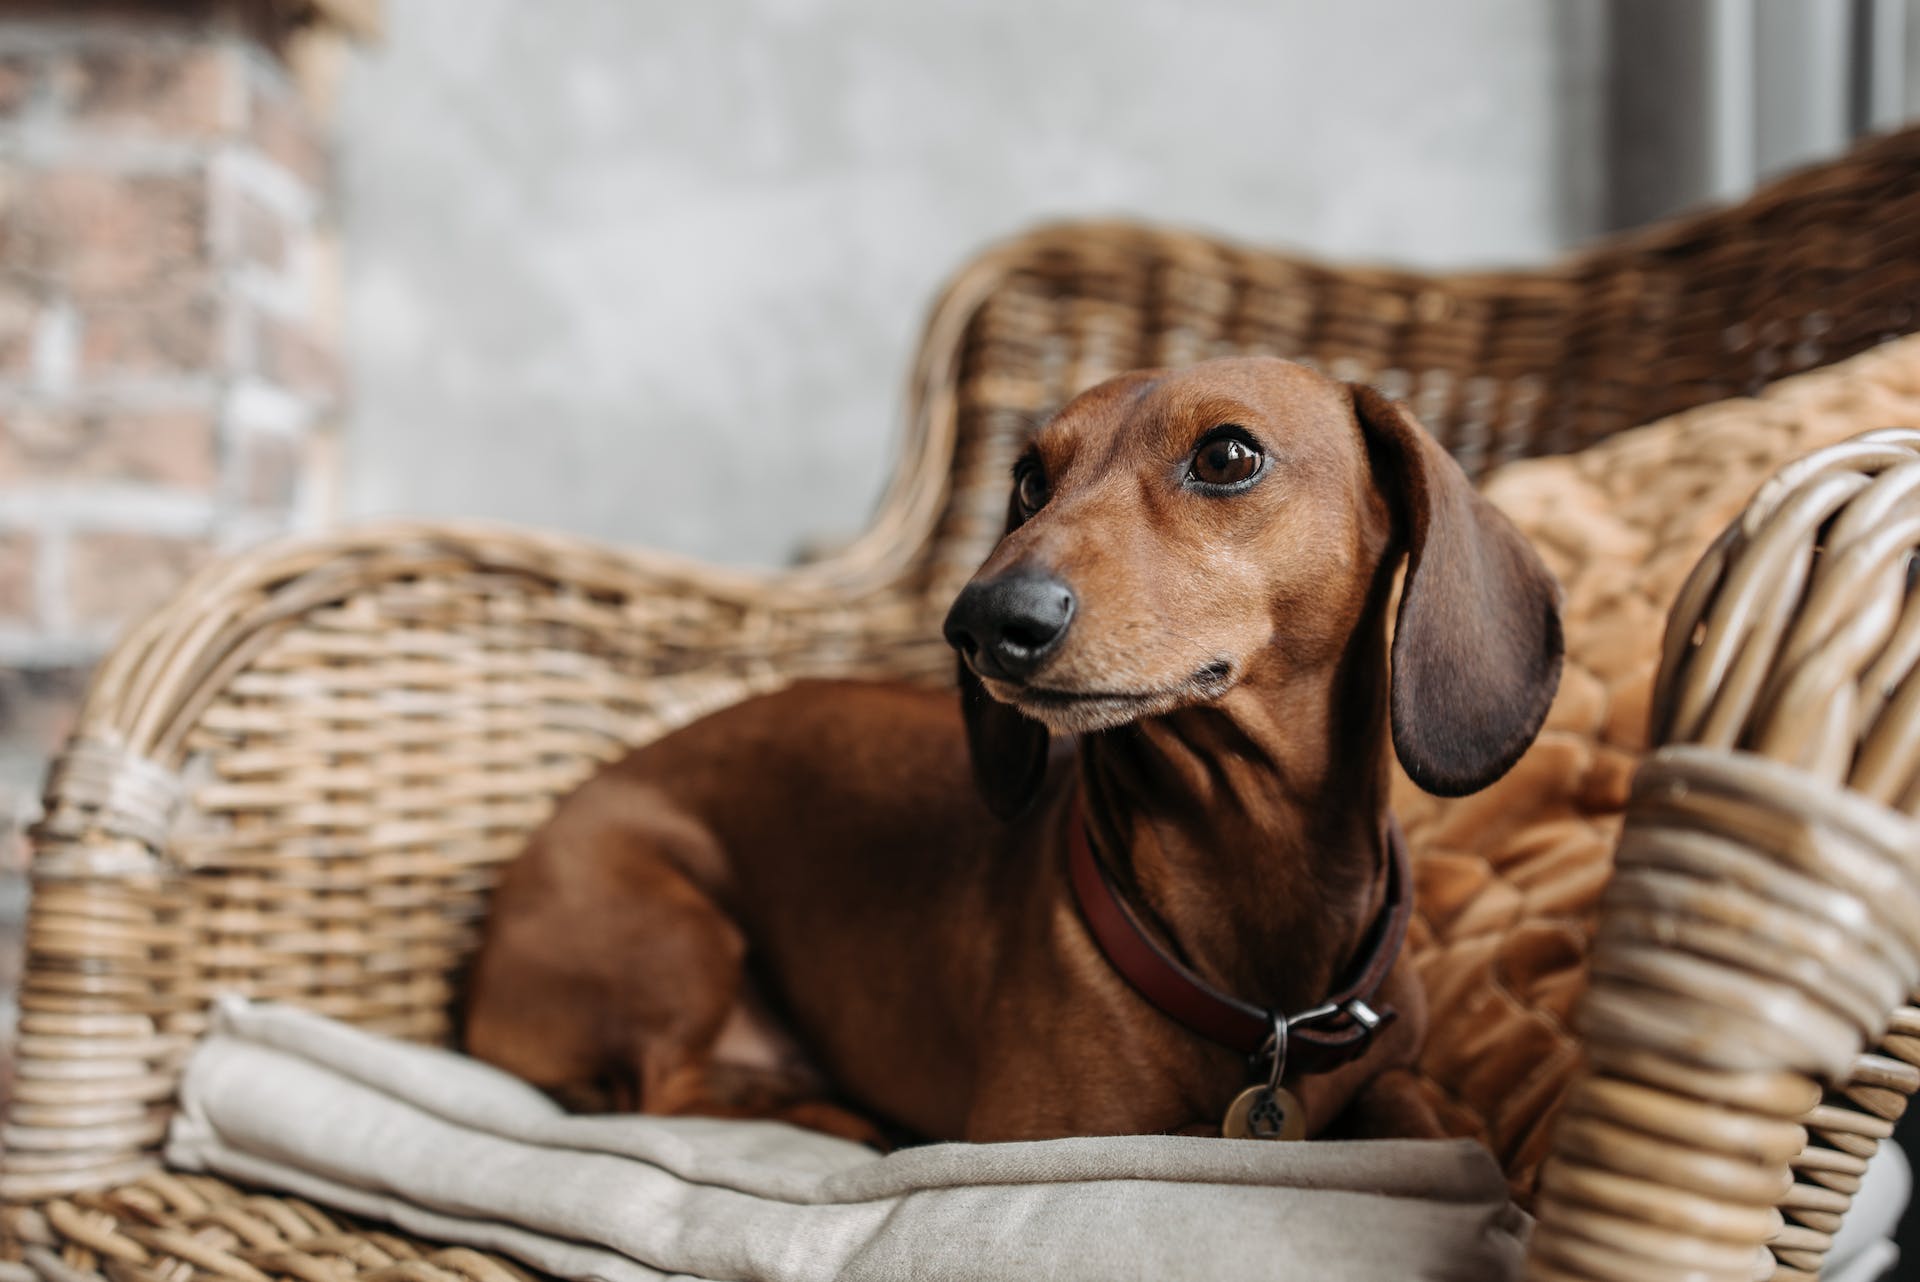 A brown Dachshund sitting on a wicker chair indoors